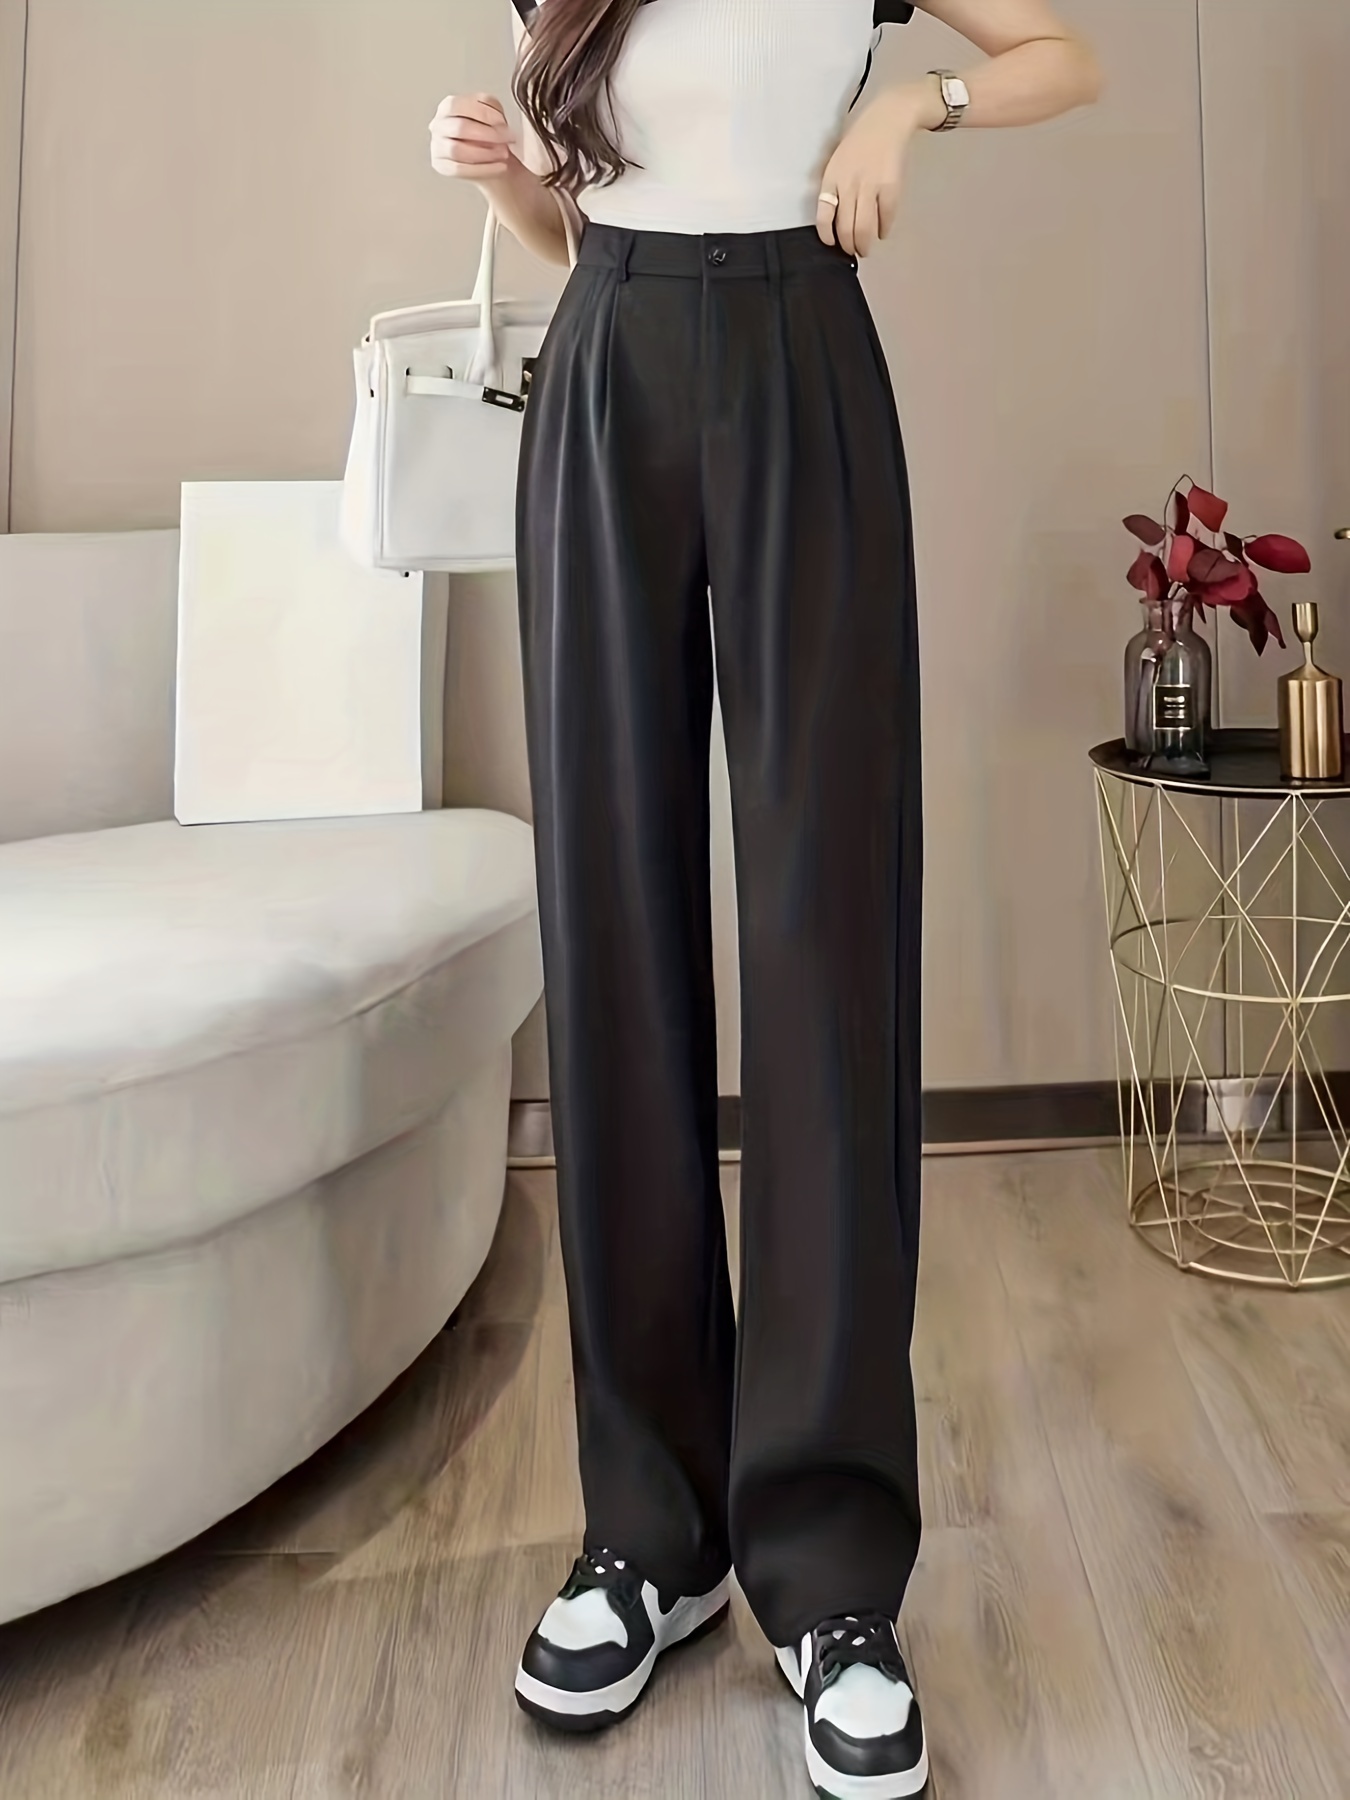 UUE Stretch Dress Pants Plus Size for Women 29/32/34 Pull On